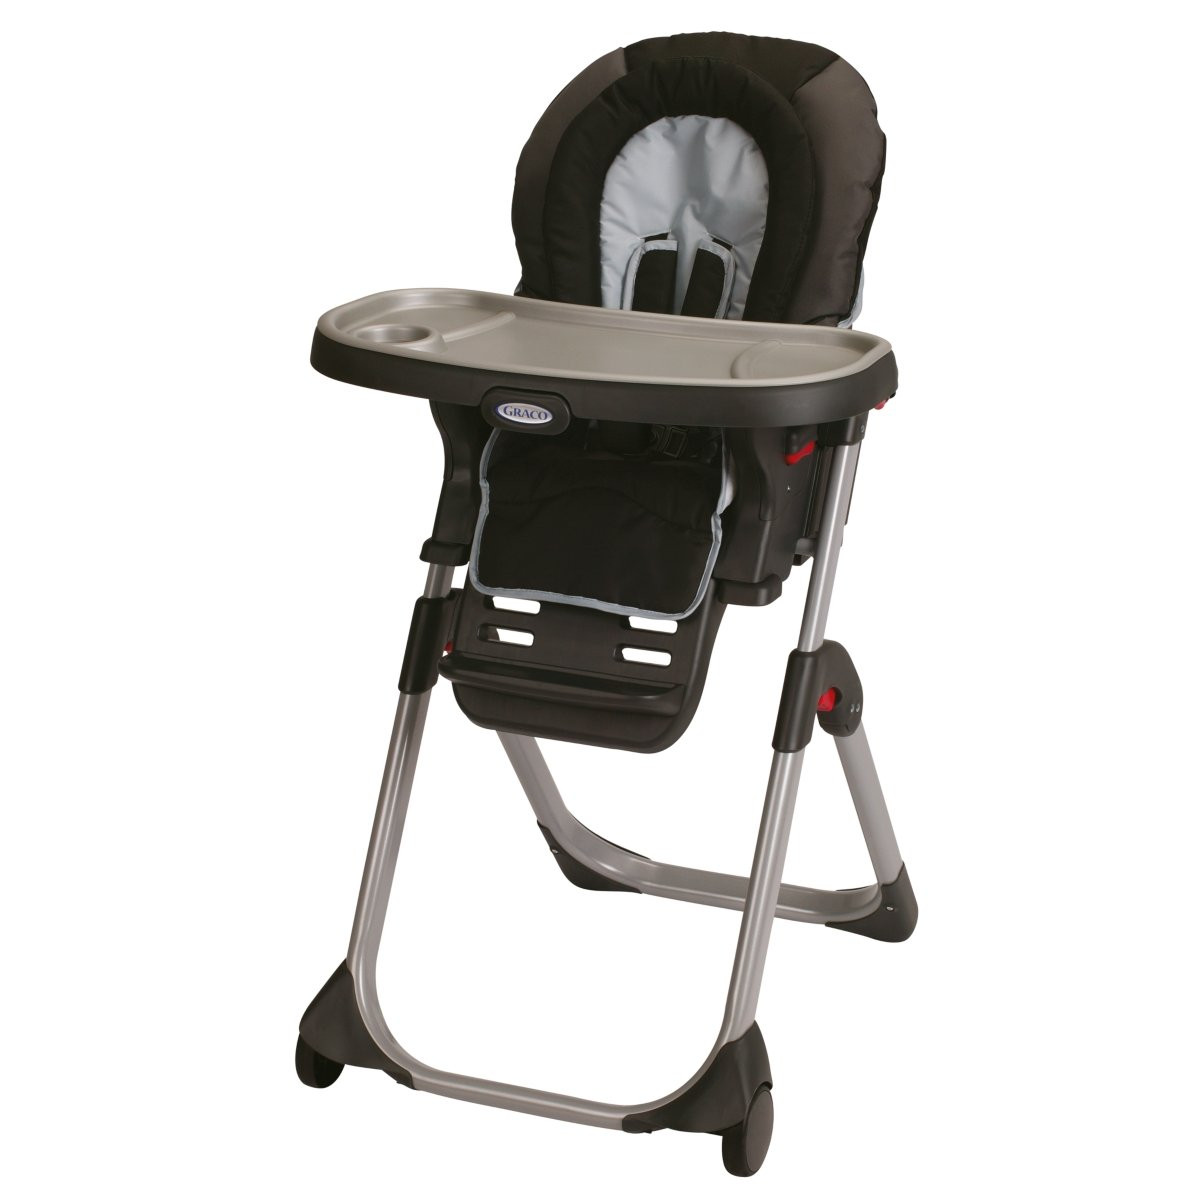 Best ideas about Baby High Chair
. Save or Pin Amazon Graco DuoDiner LX Highchair Tangerine Now.